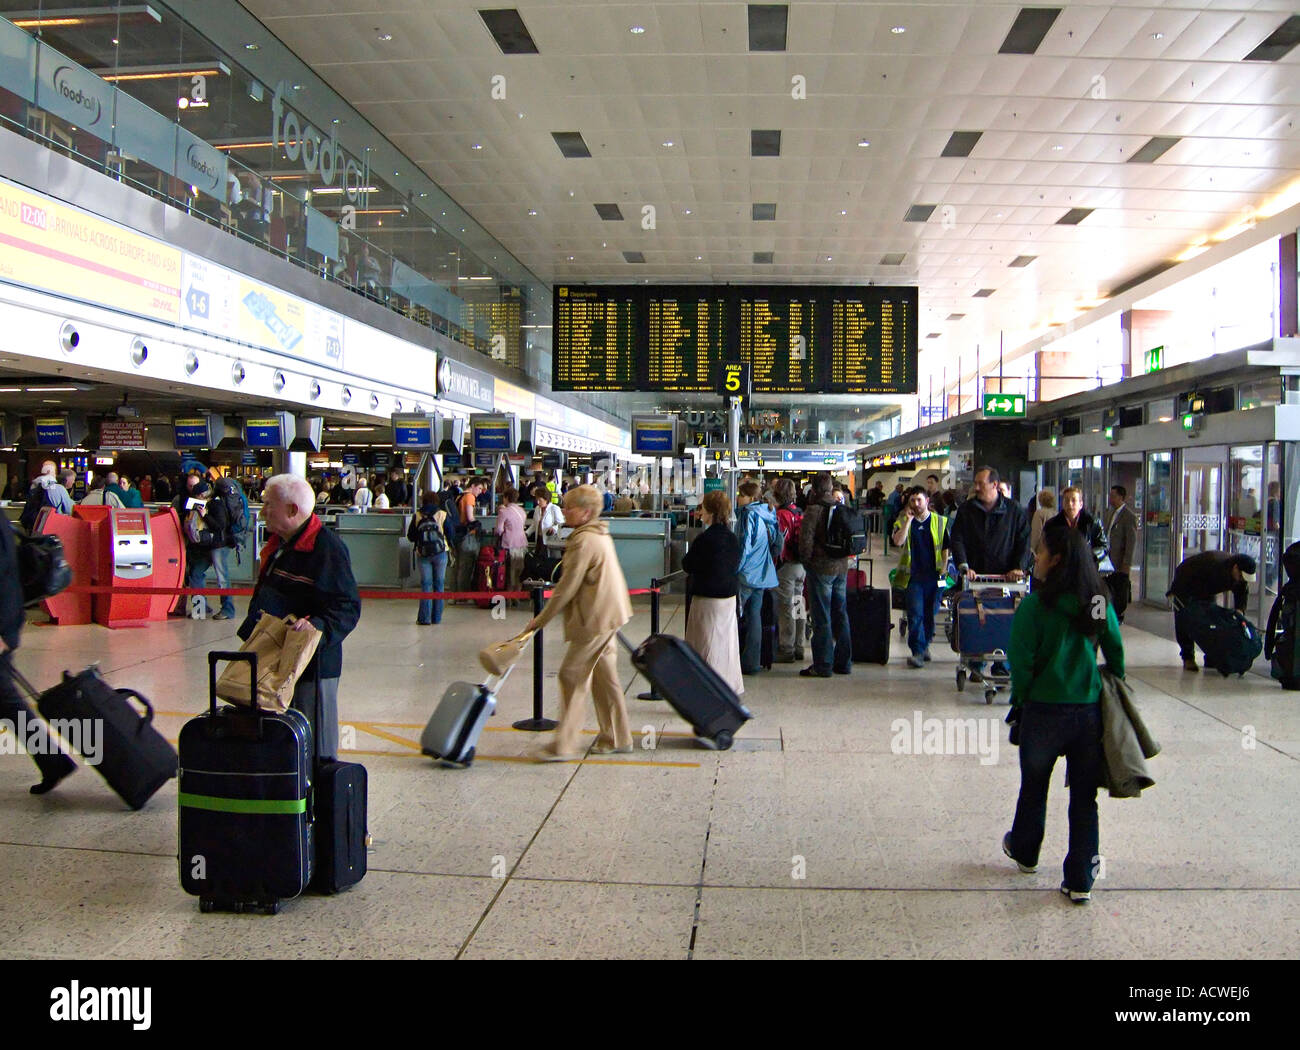 A busy airport departures area - Dublin airport Stock Photo